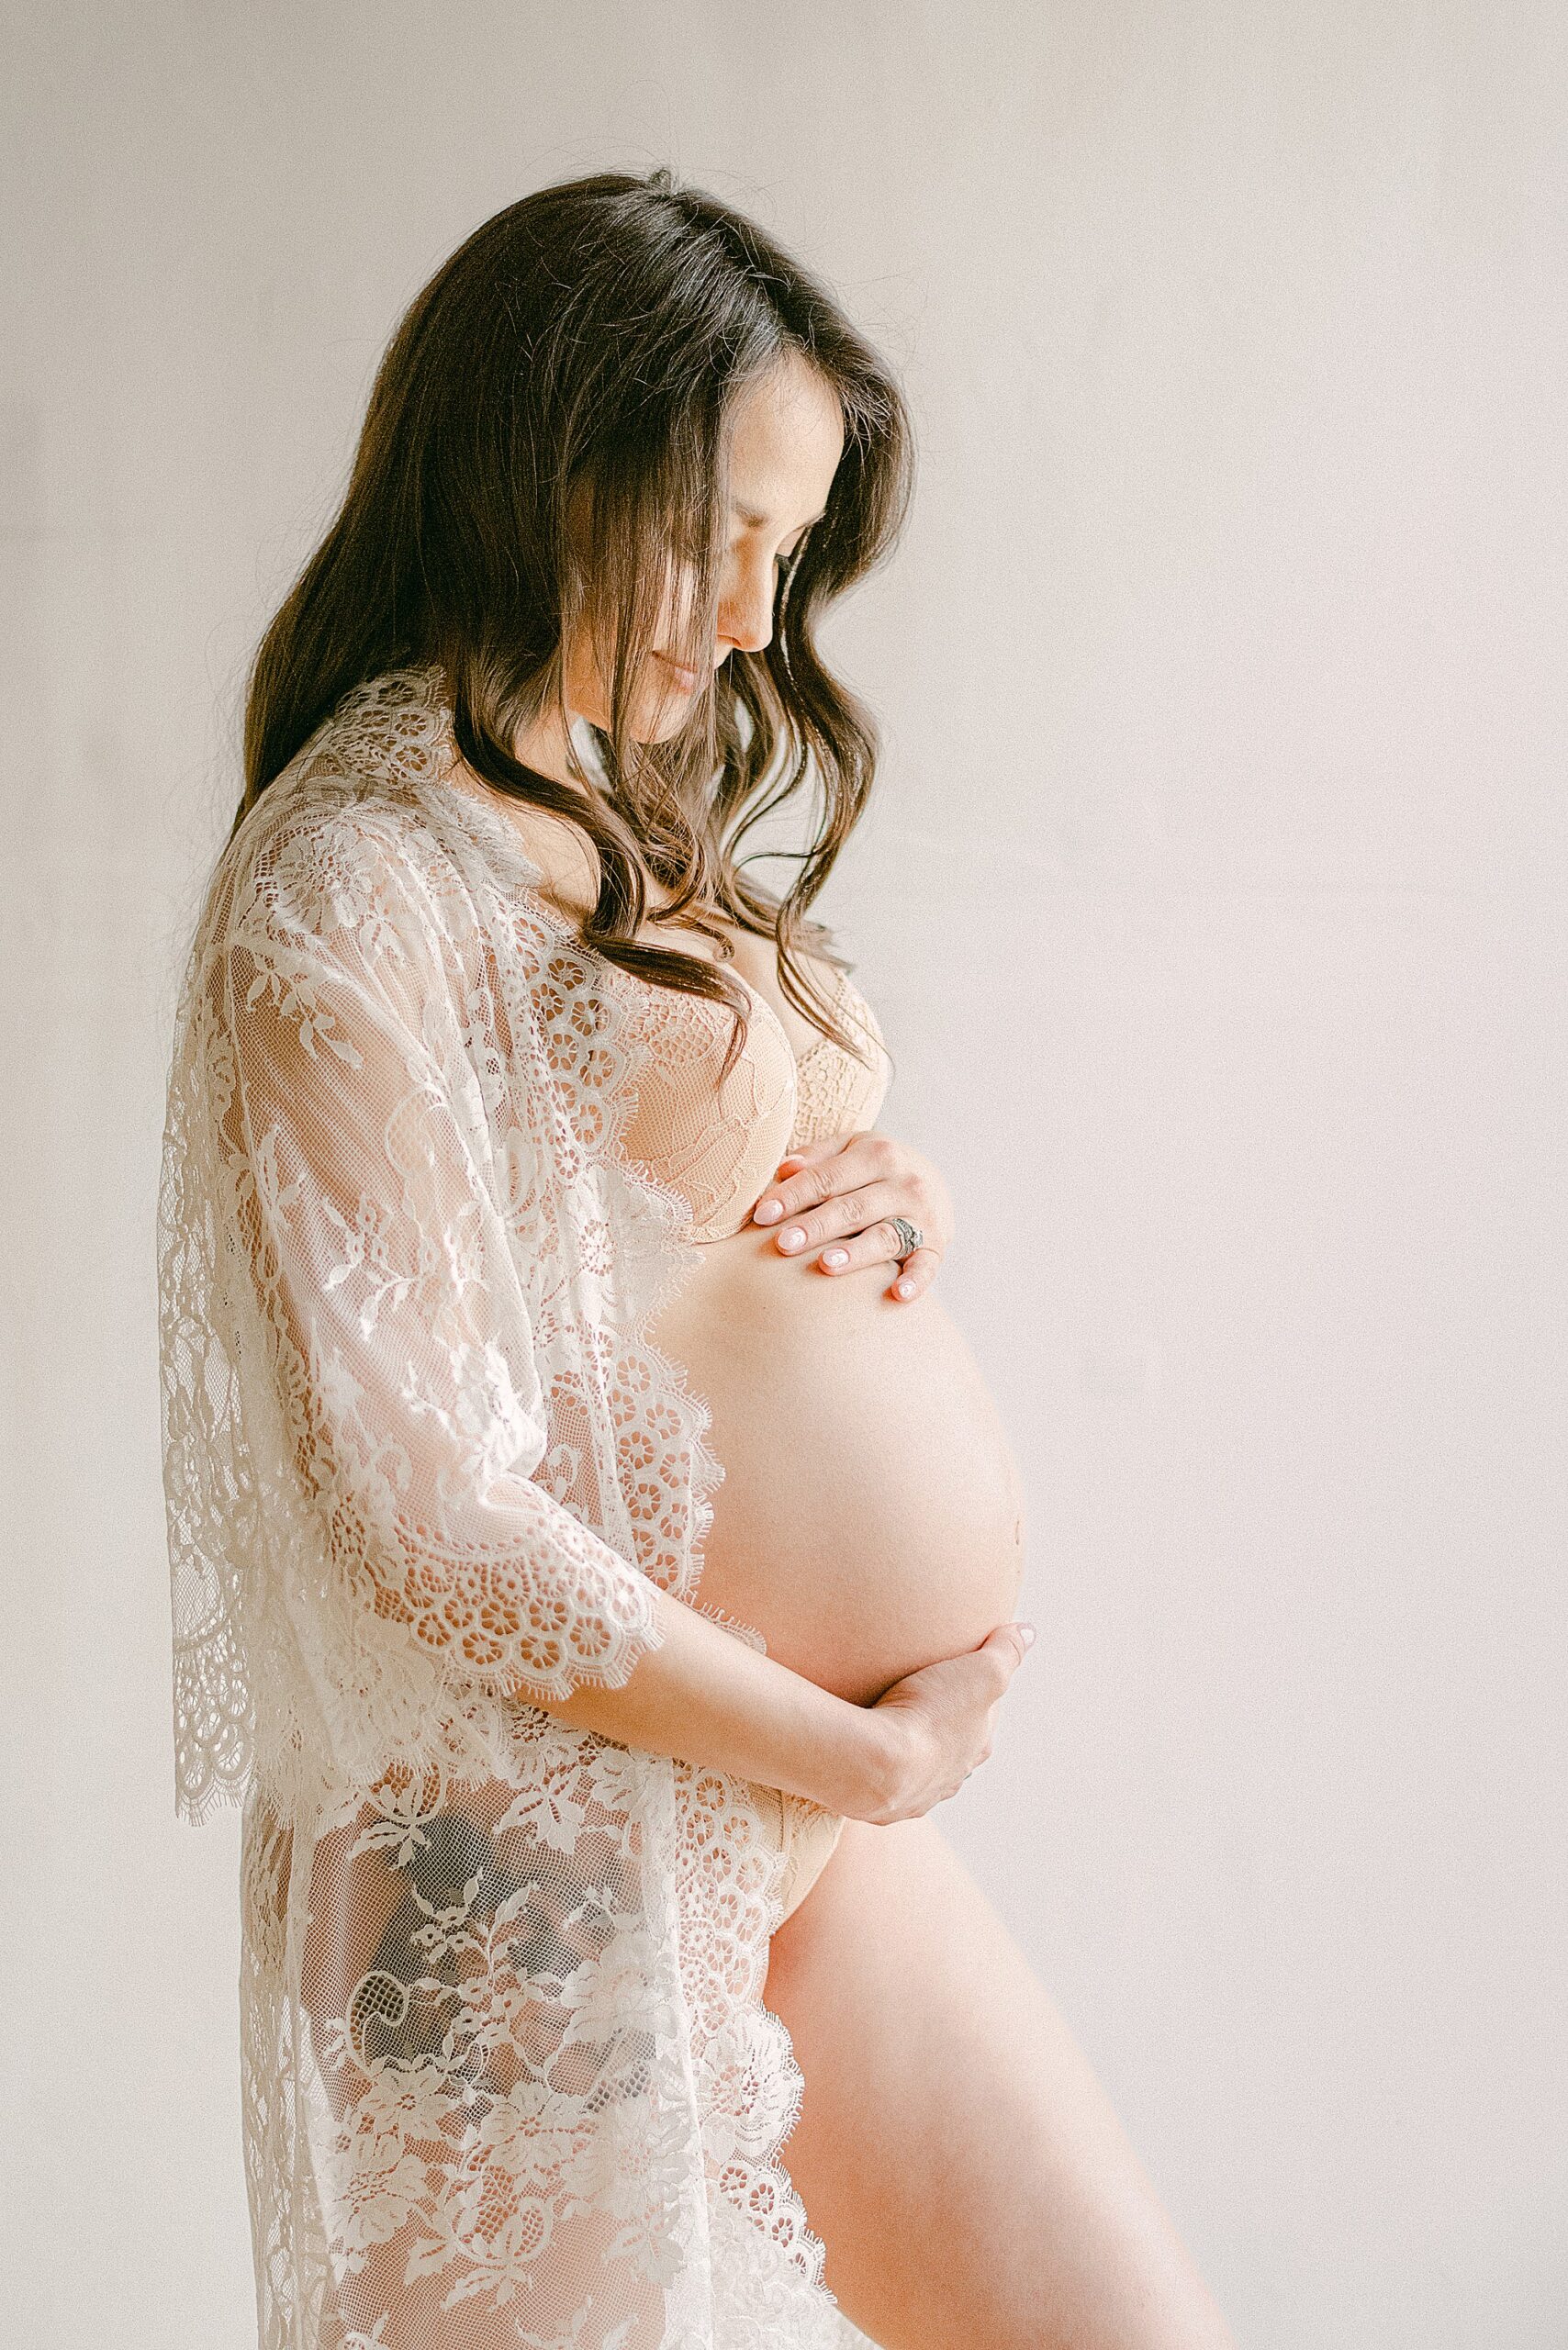 Side profile of expecting mom in white lace robe holding baby bump